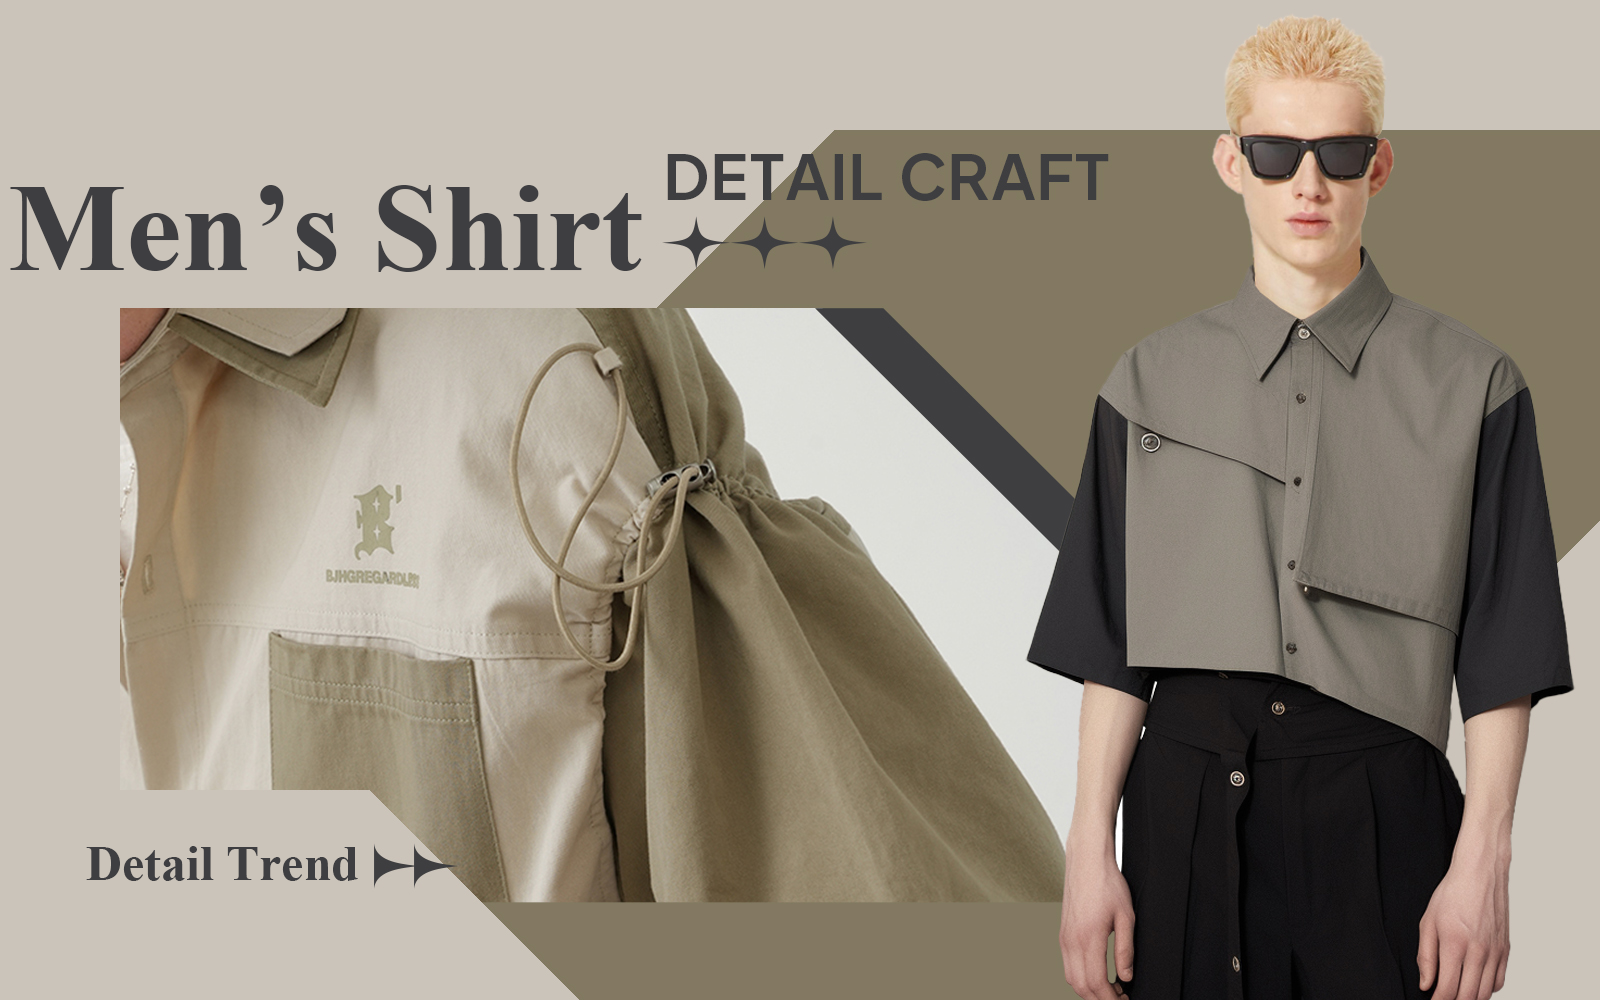 The Detail & Craft Trend for Men's Shirt